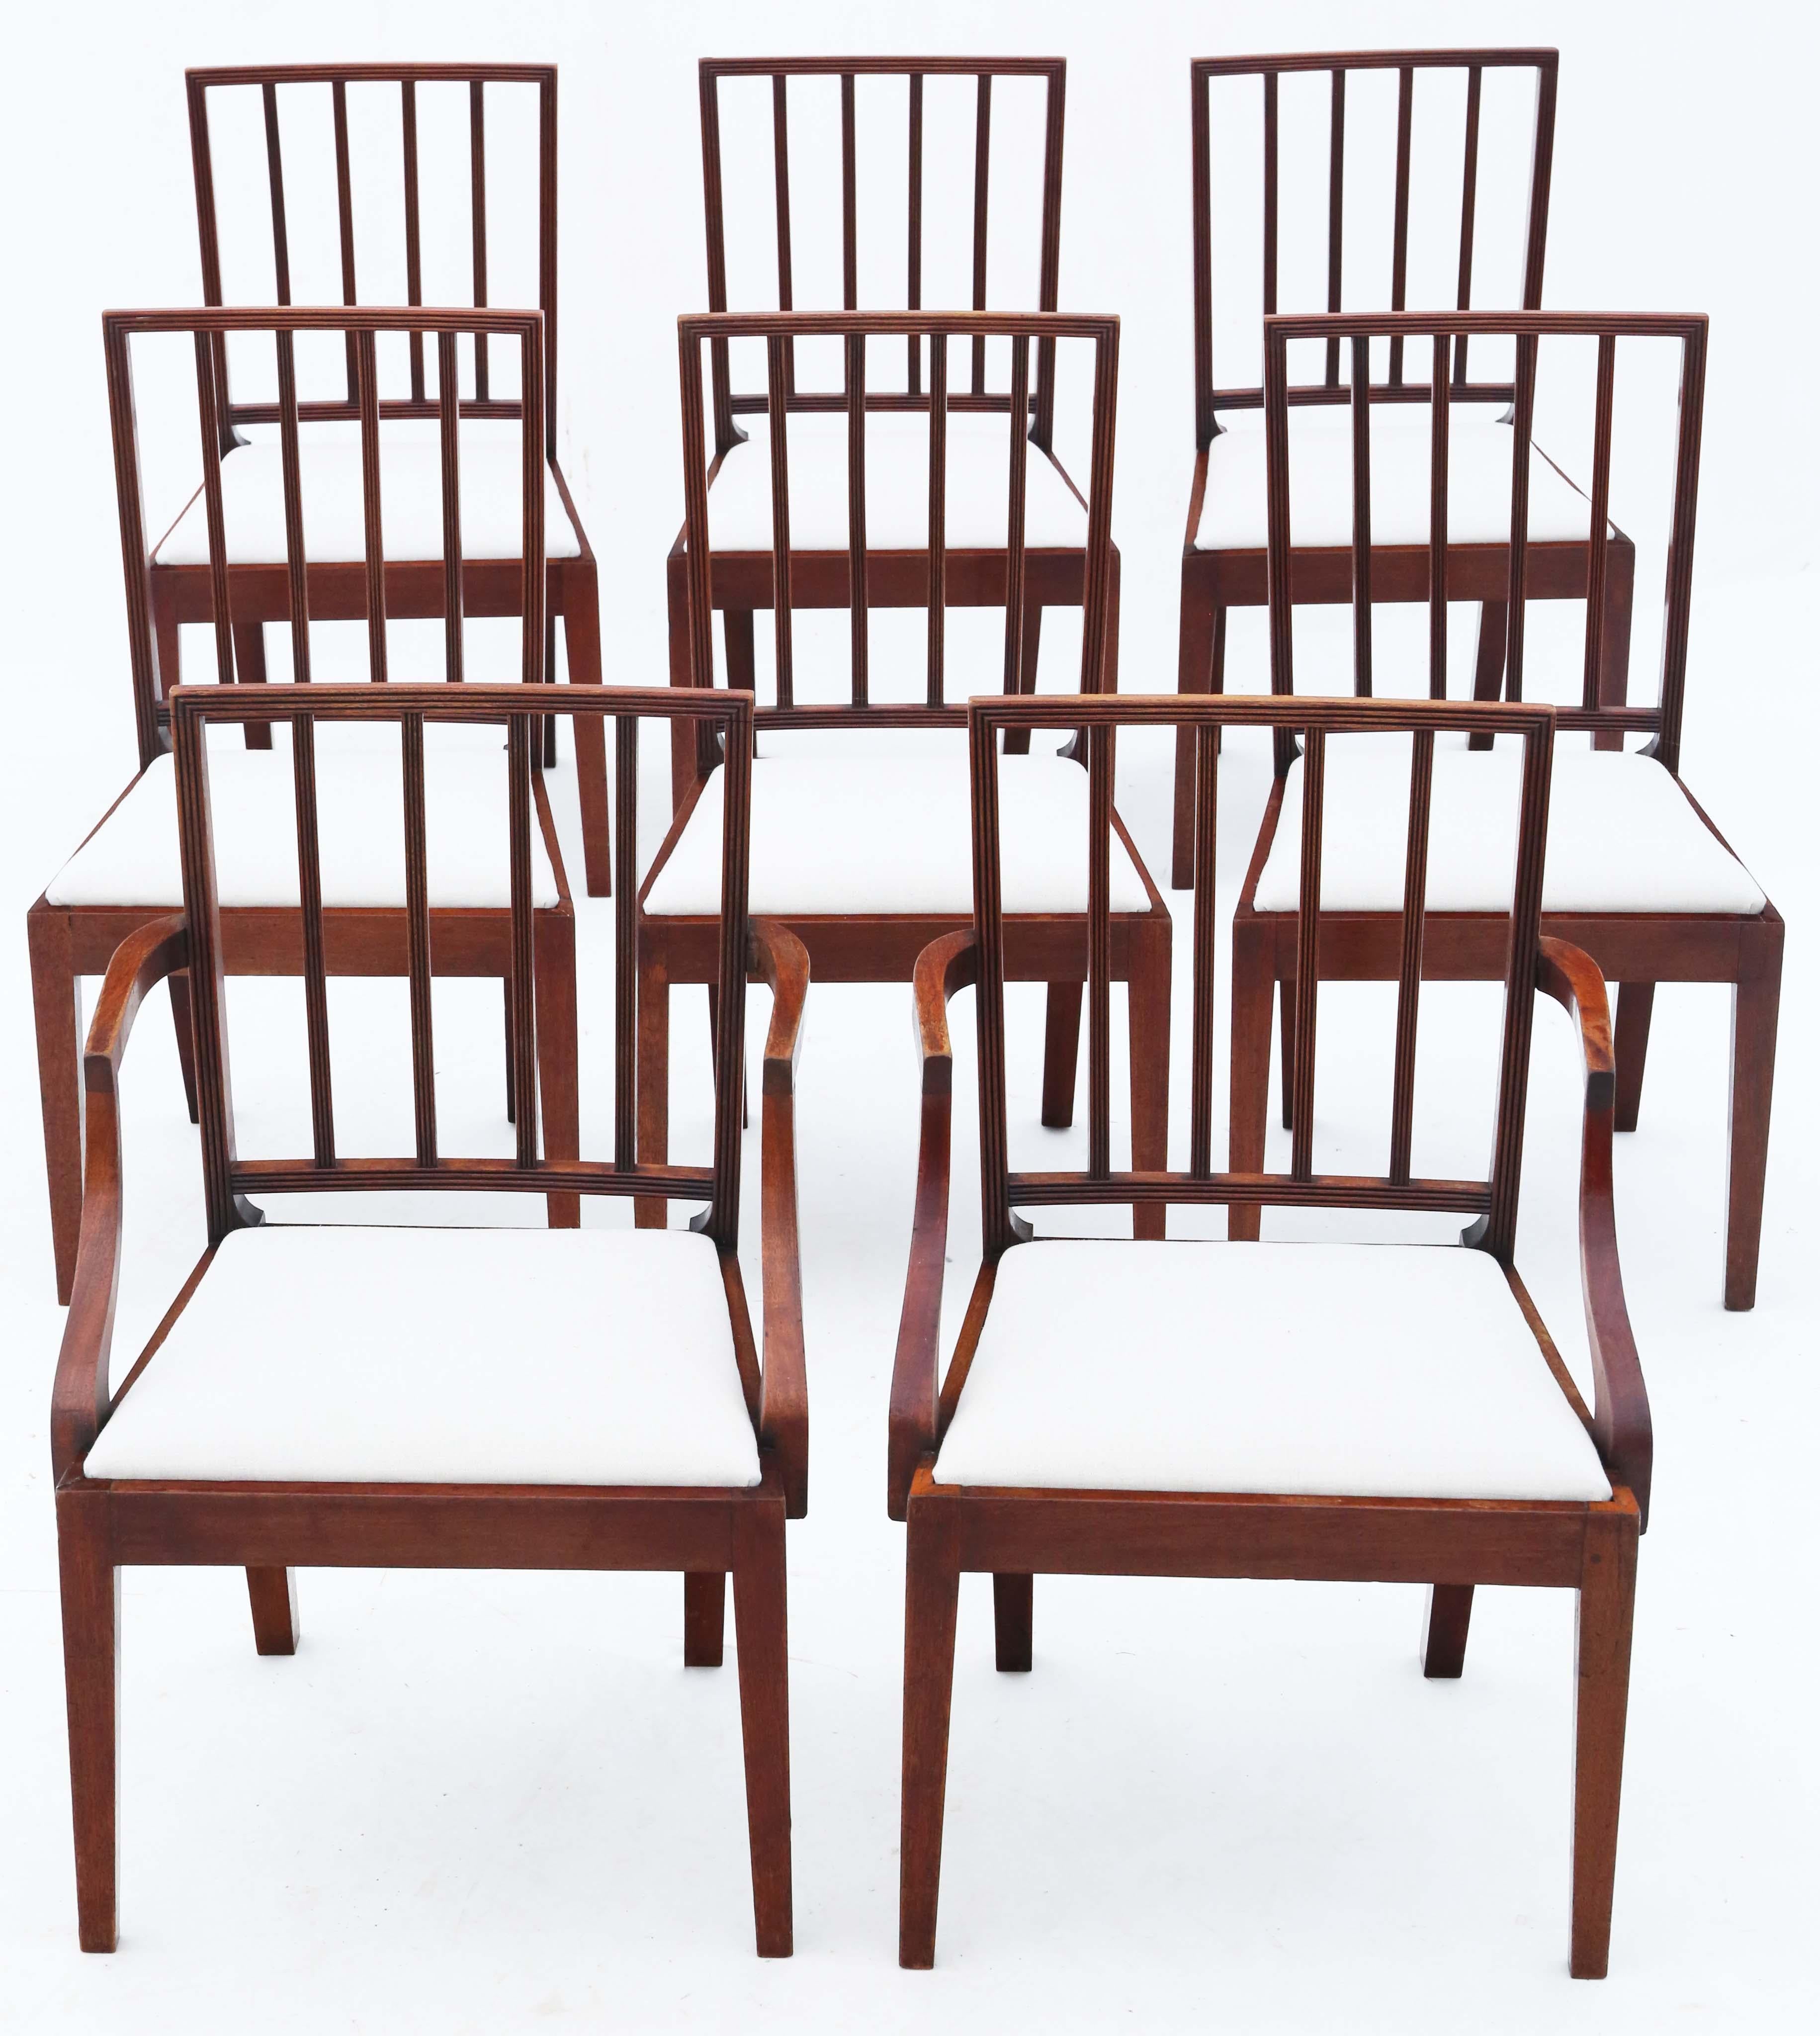 Delve into the rare elegance of this exceptional set of 8 (6 plus 2) early 19th Century mahogany dining chairs, dating back to circa 1820. These chairs boast a simple yet elegant design that epitomizes the sophistication of the era.

Crafted with